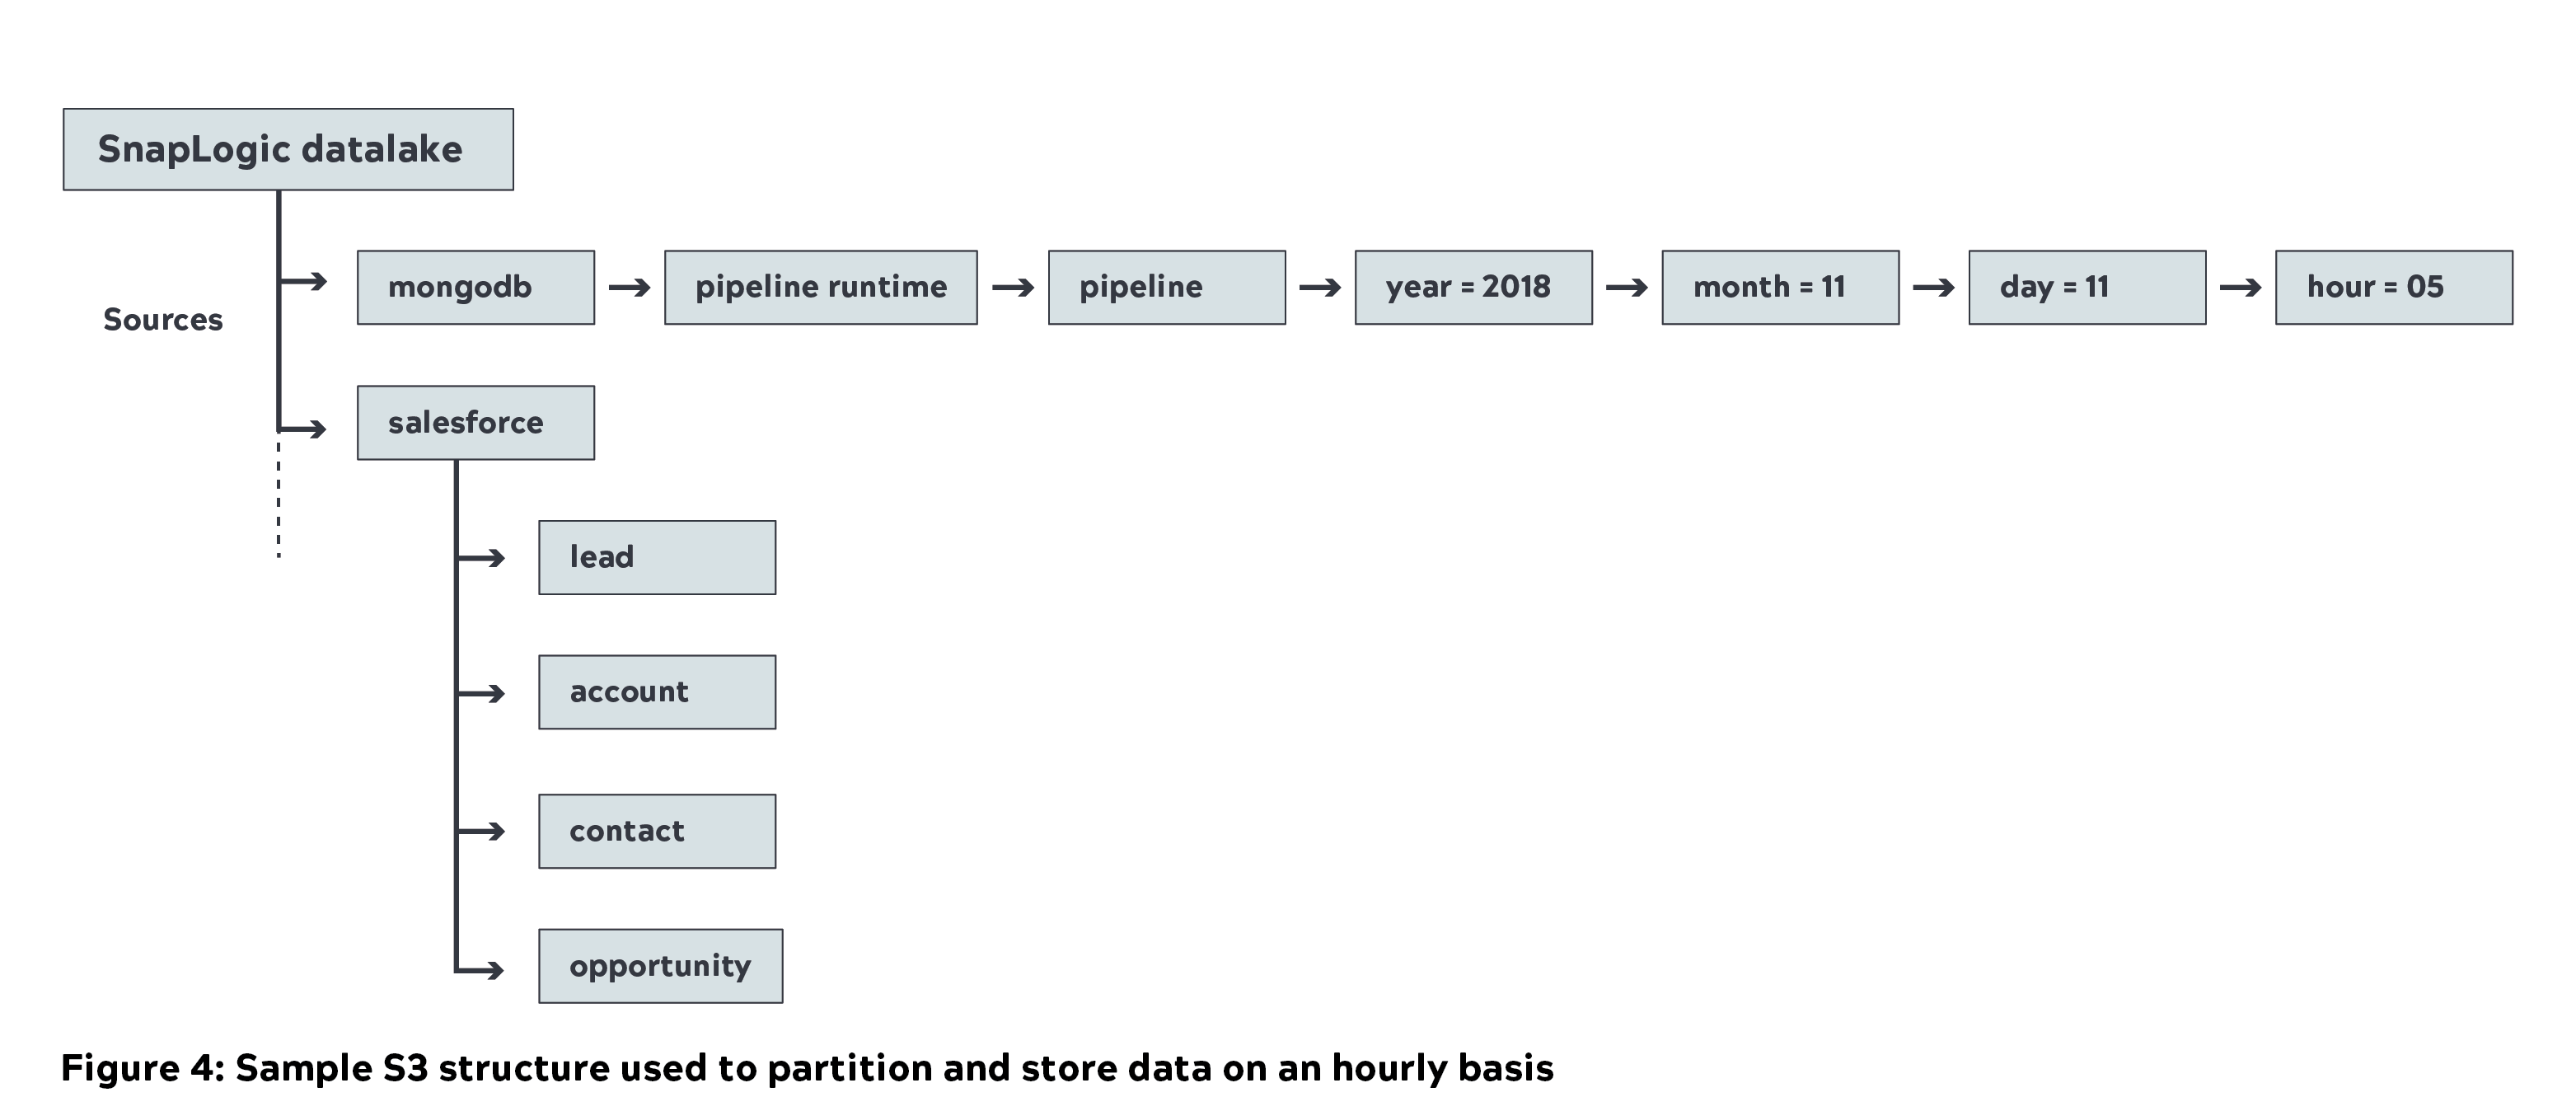 Sample S3 structure used to partition and store data on an hourly basis